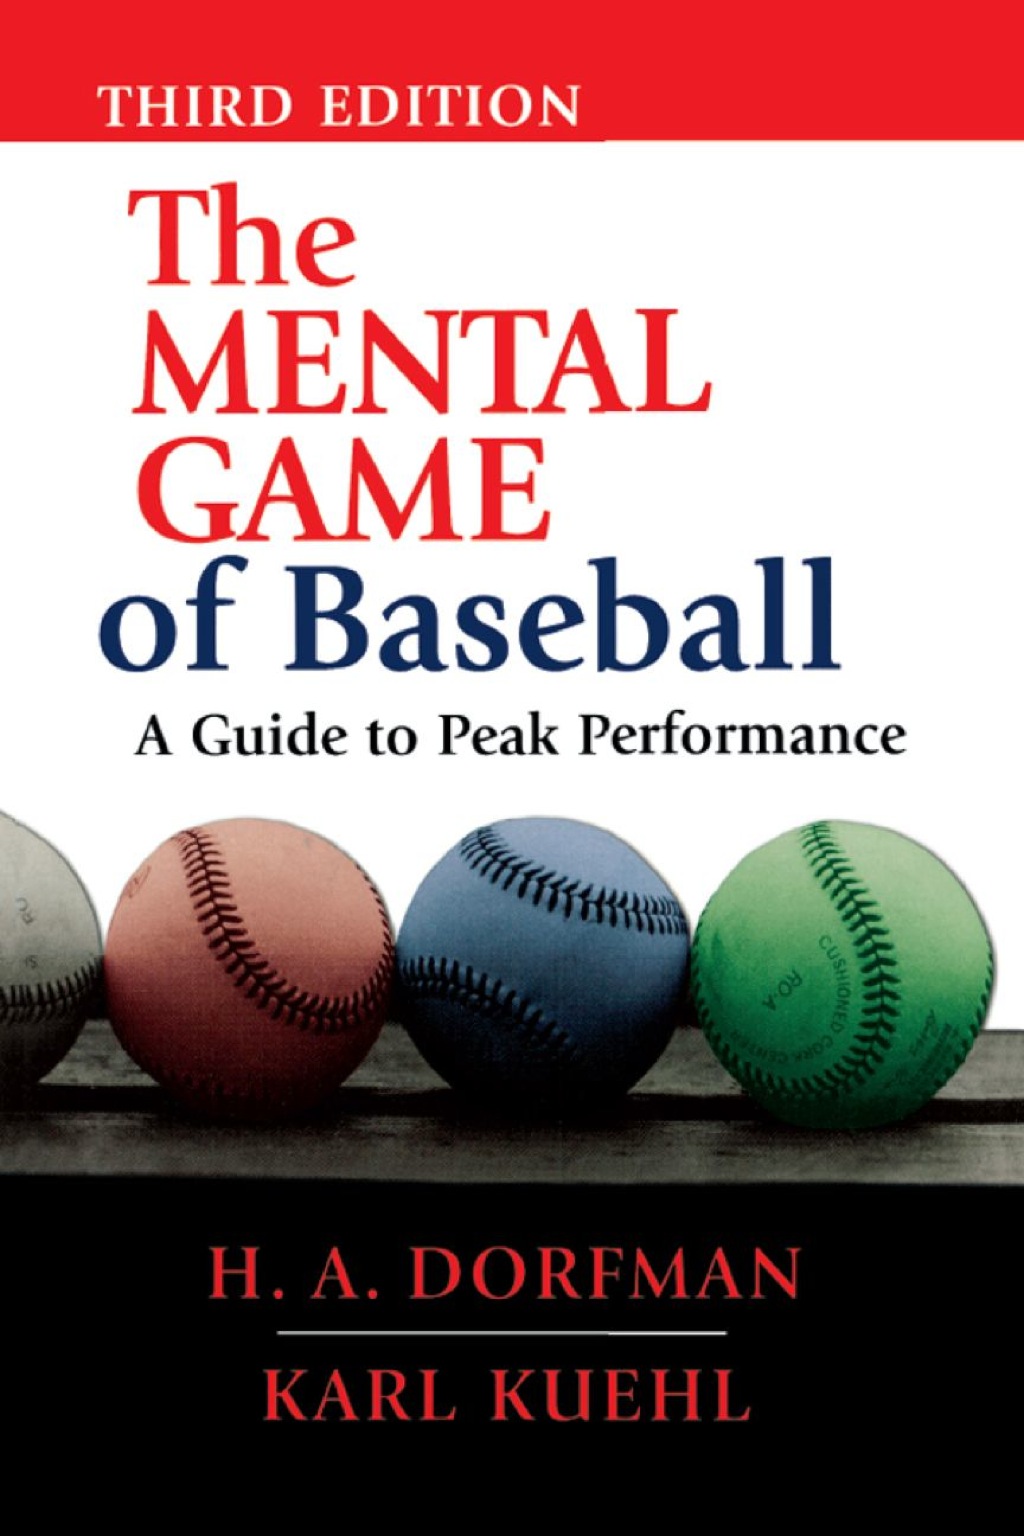 The Mental Game of Baseball - 3rd Edition (eBook Rental)